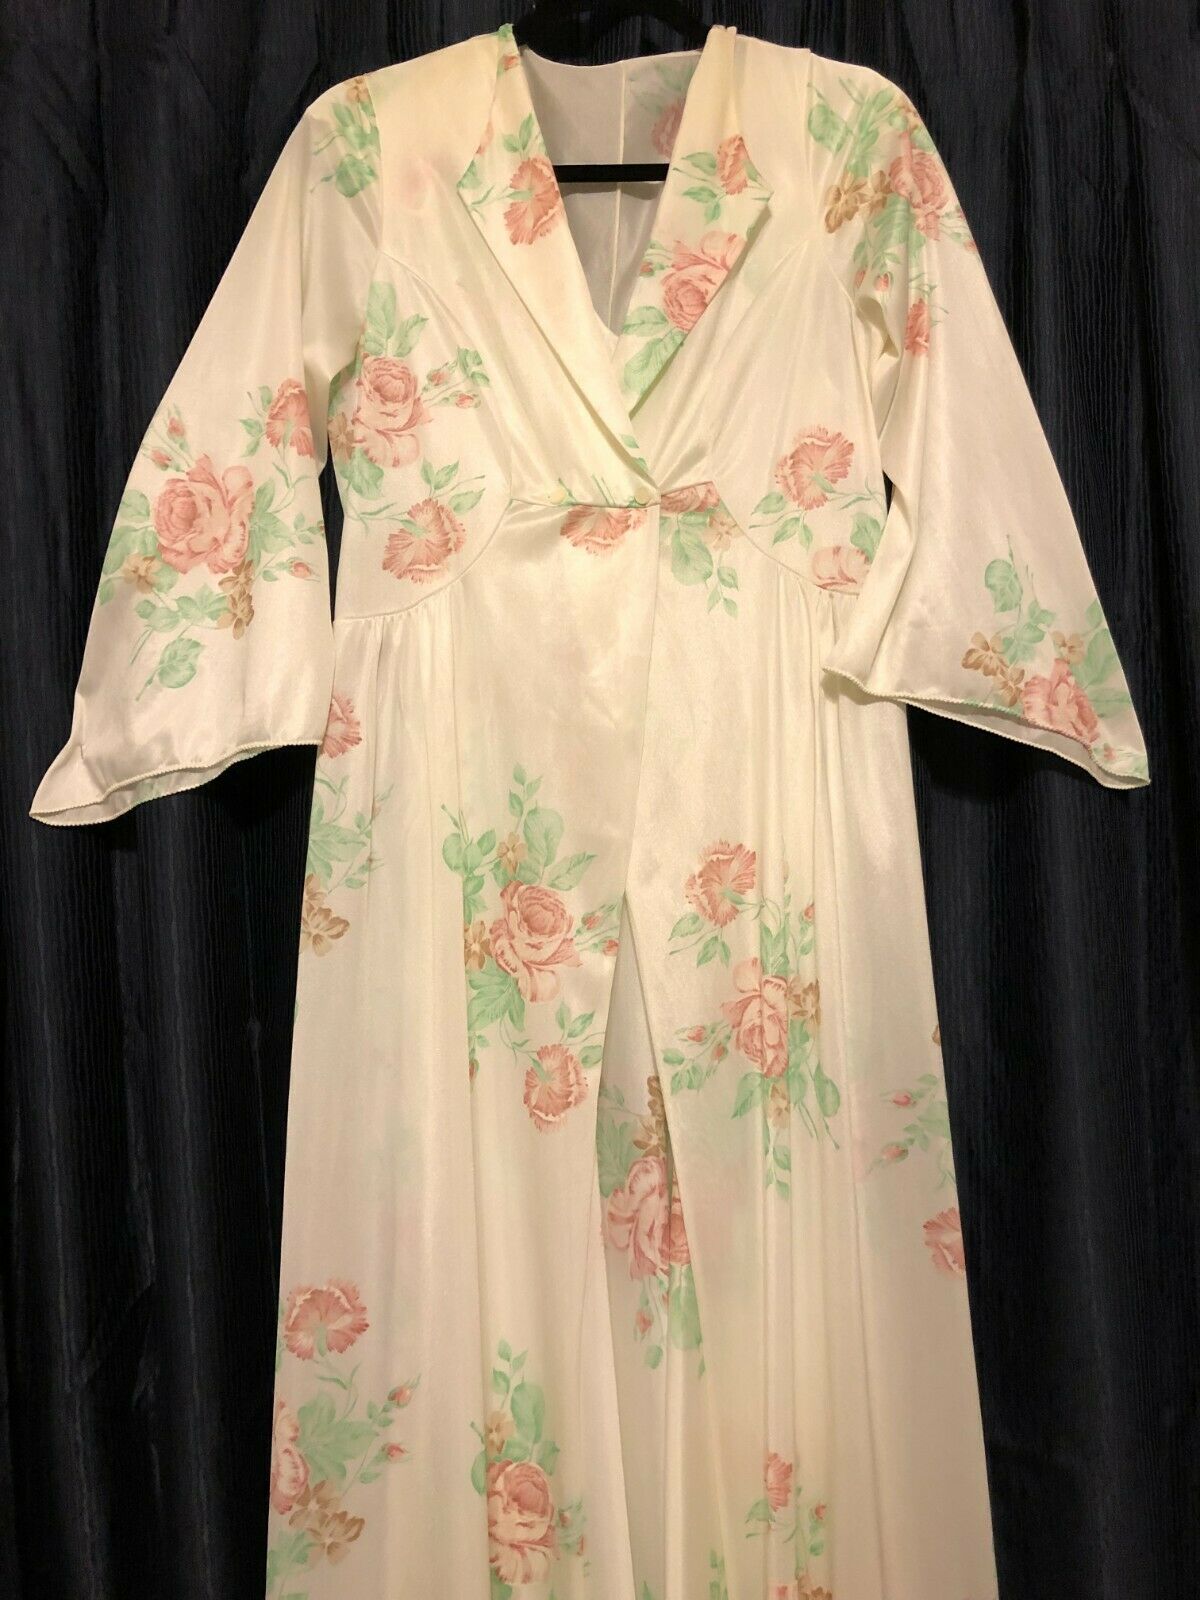 Vintage Sears Floral Nightgown And Robe Set 36 Medium